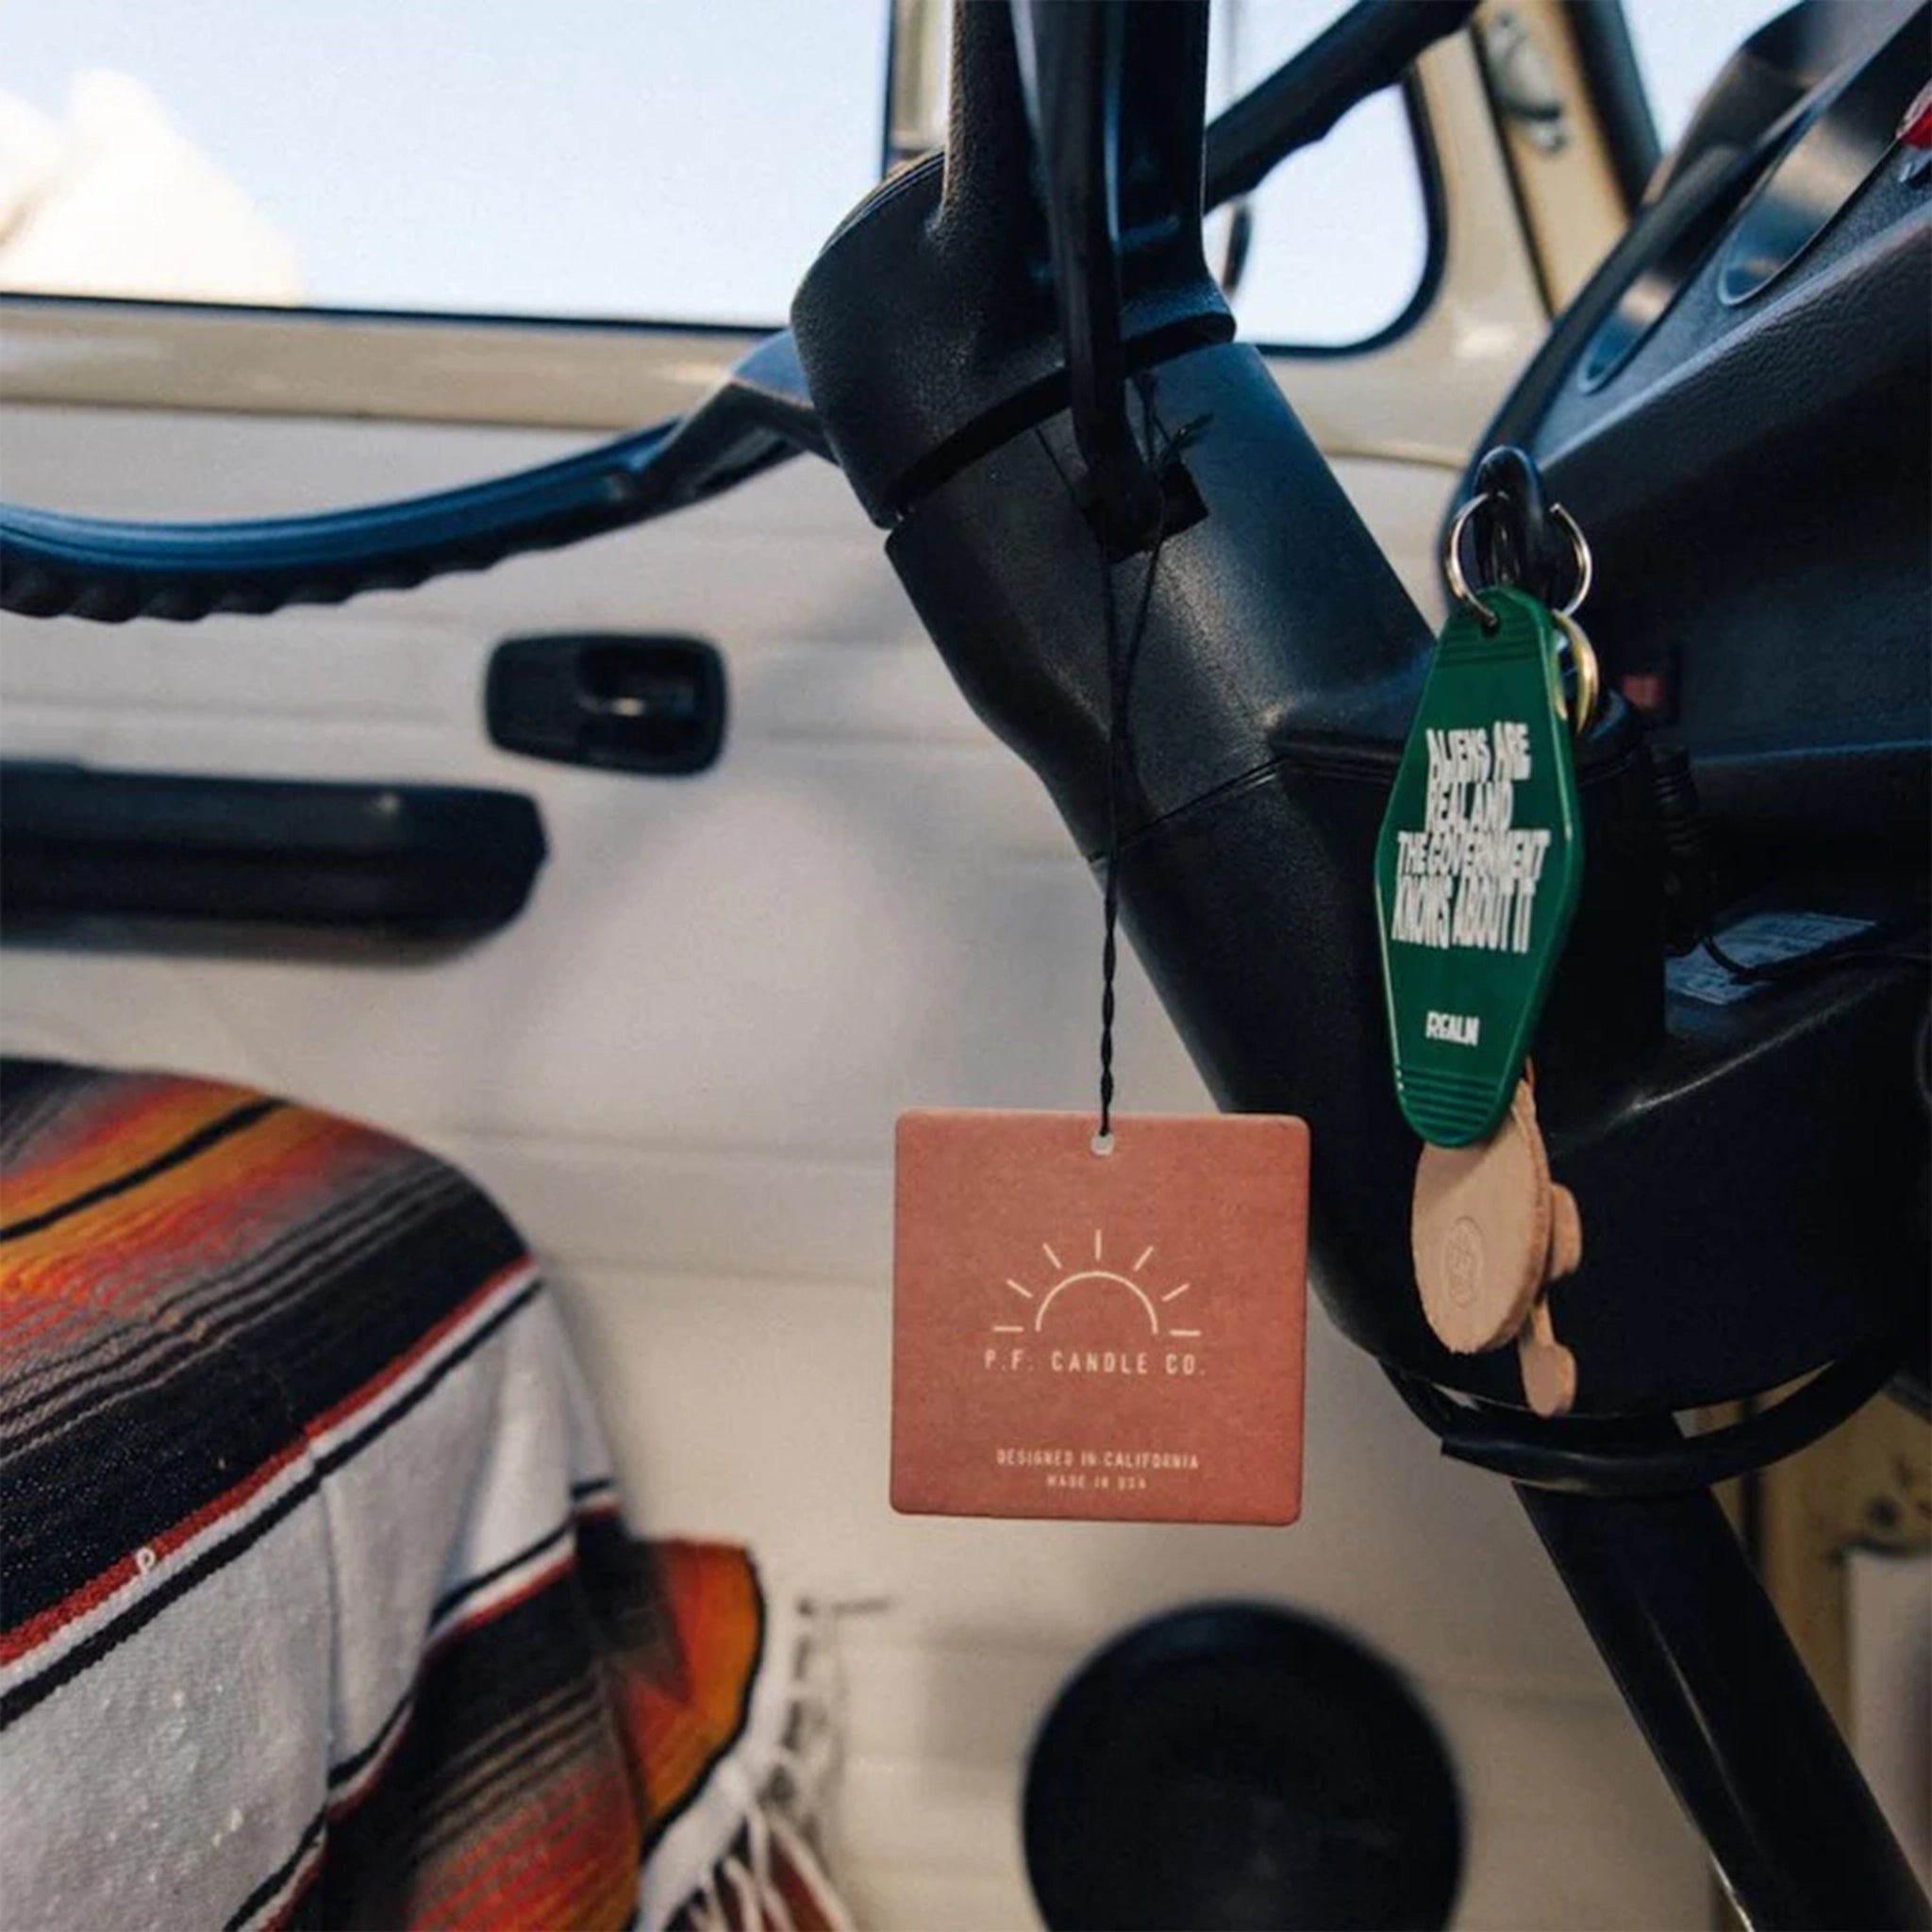 The square cardboard car fragrance hanging on the rear view mirror of a car.